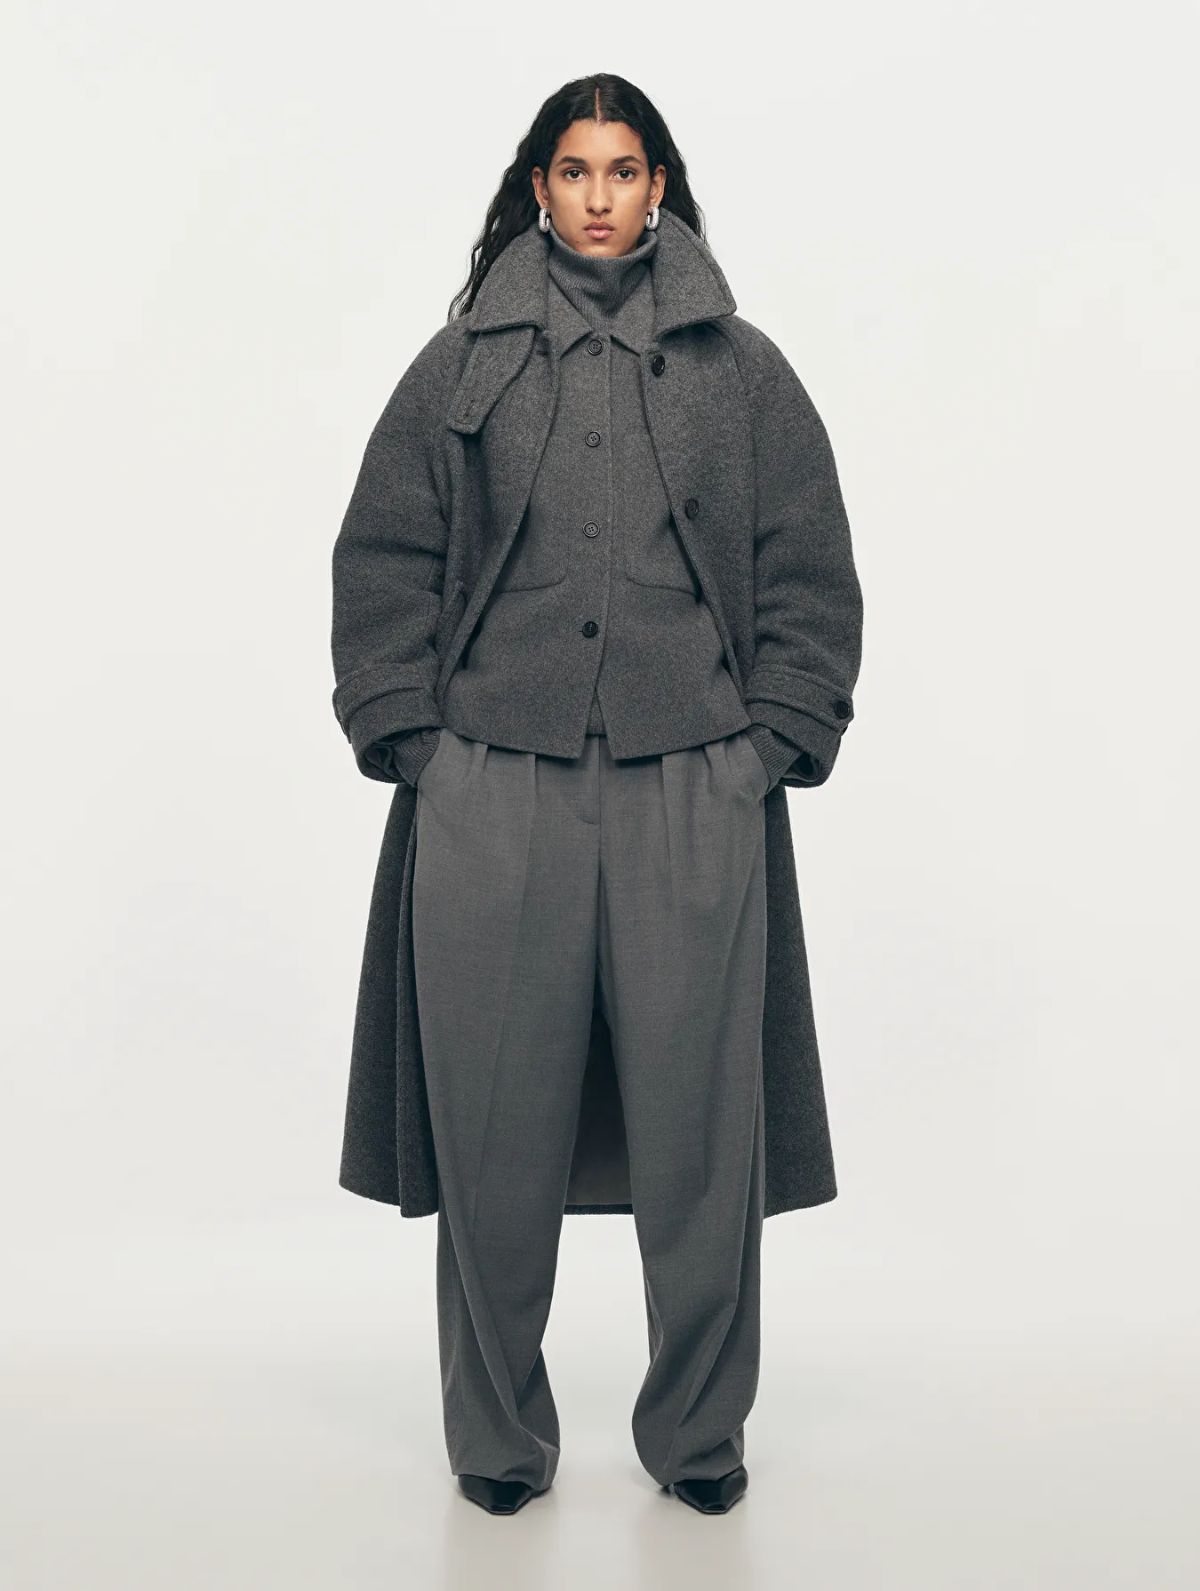 Arket Holiday Essentials Grey Melange Oversized Wool Coat, Double-Face Wool Overshirt, High-Neck Wool Jumper, Low-Waist Flannel Trousers